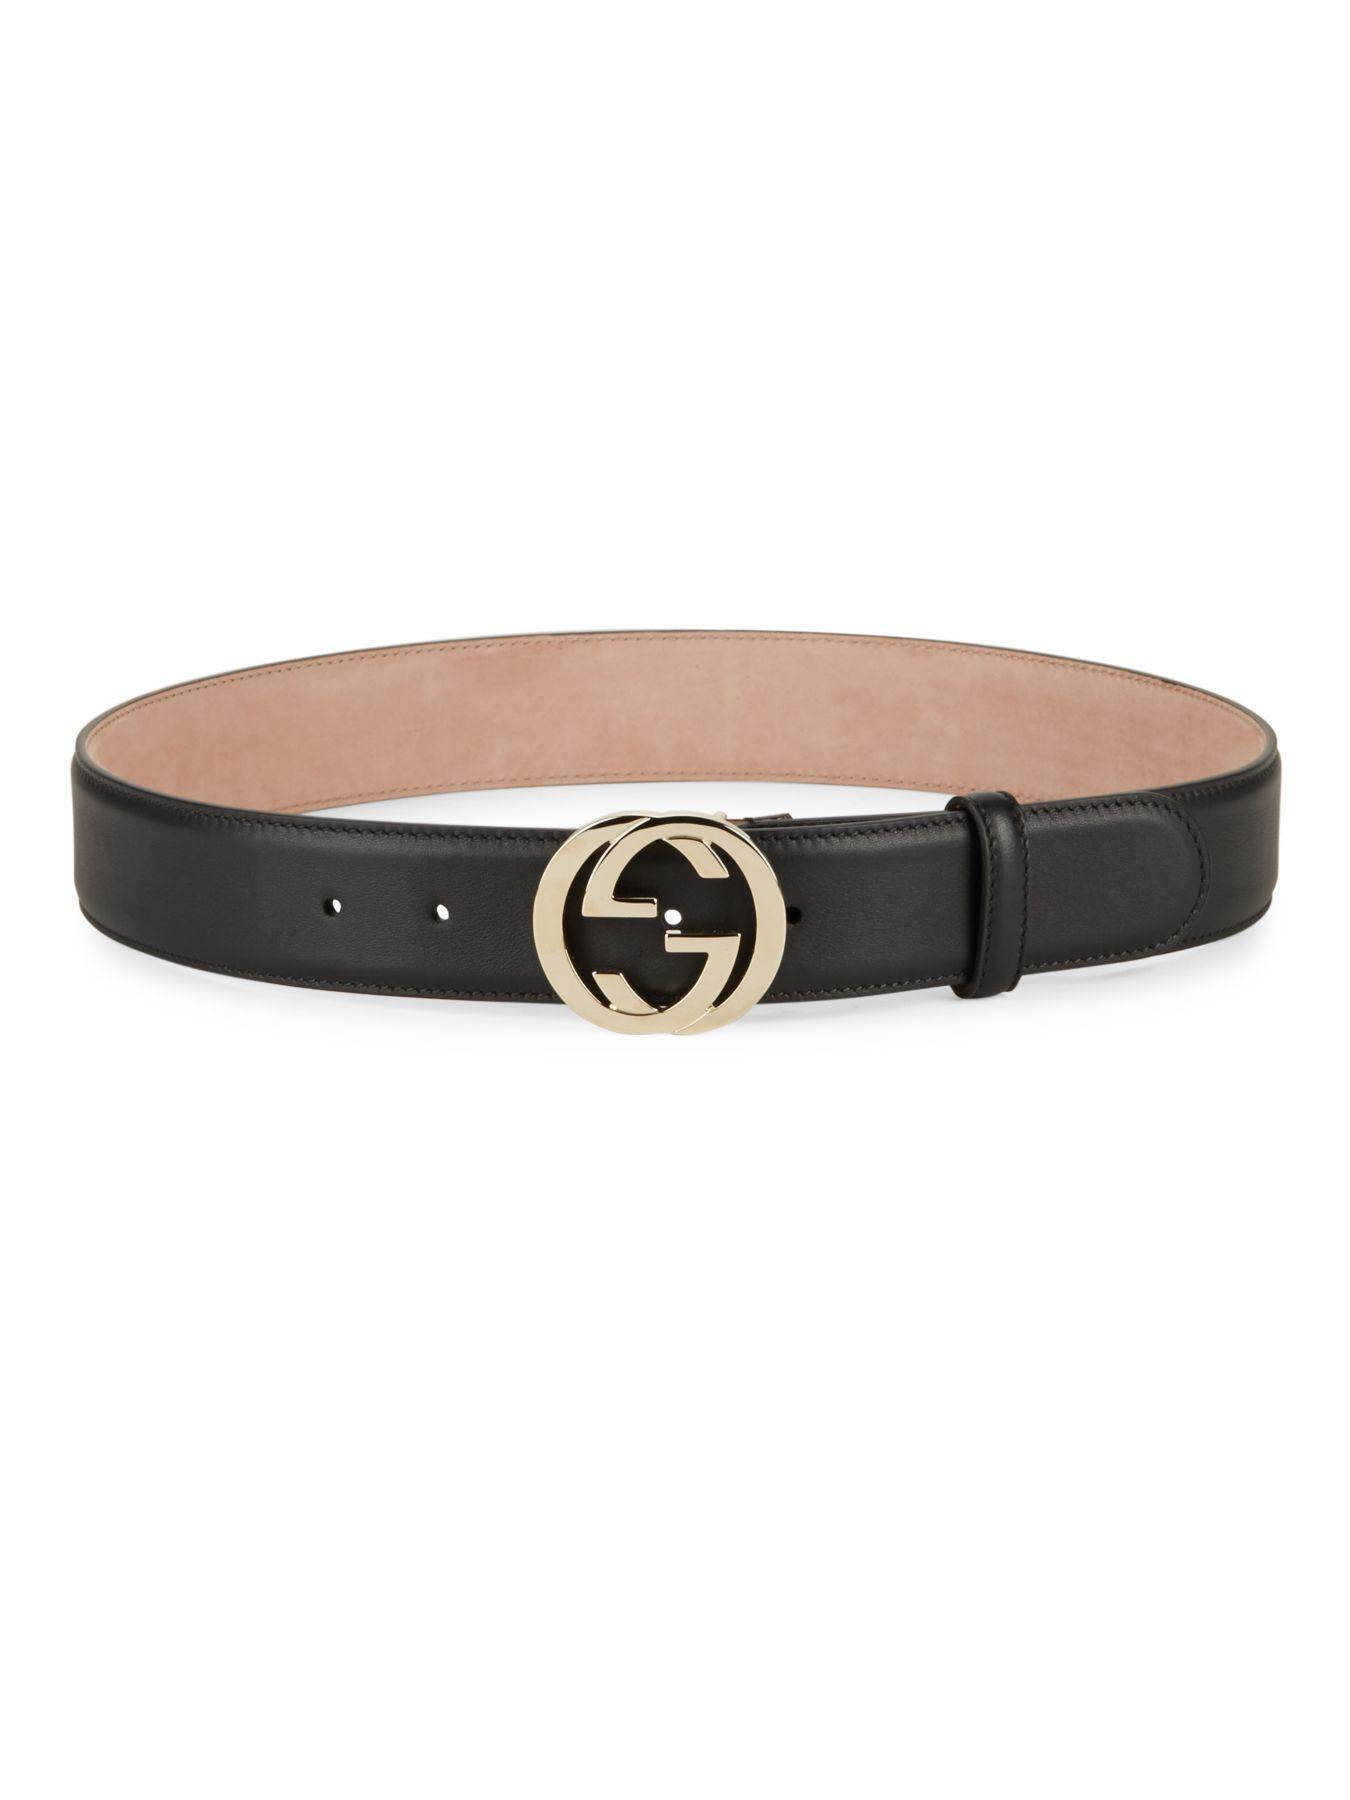 Gucci Leather Belt With G Buckle in Black - Lyst